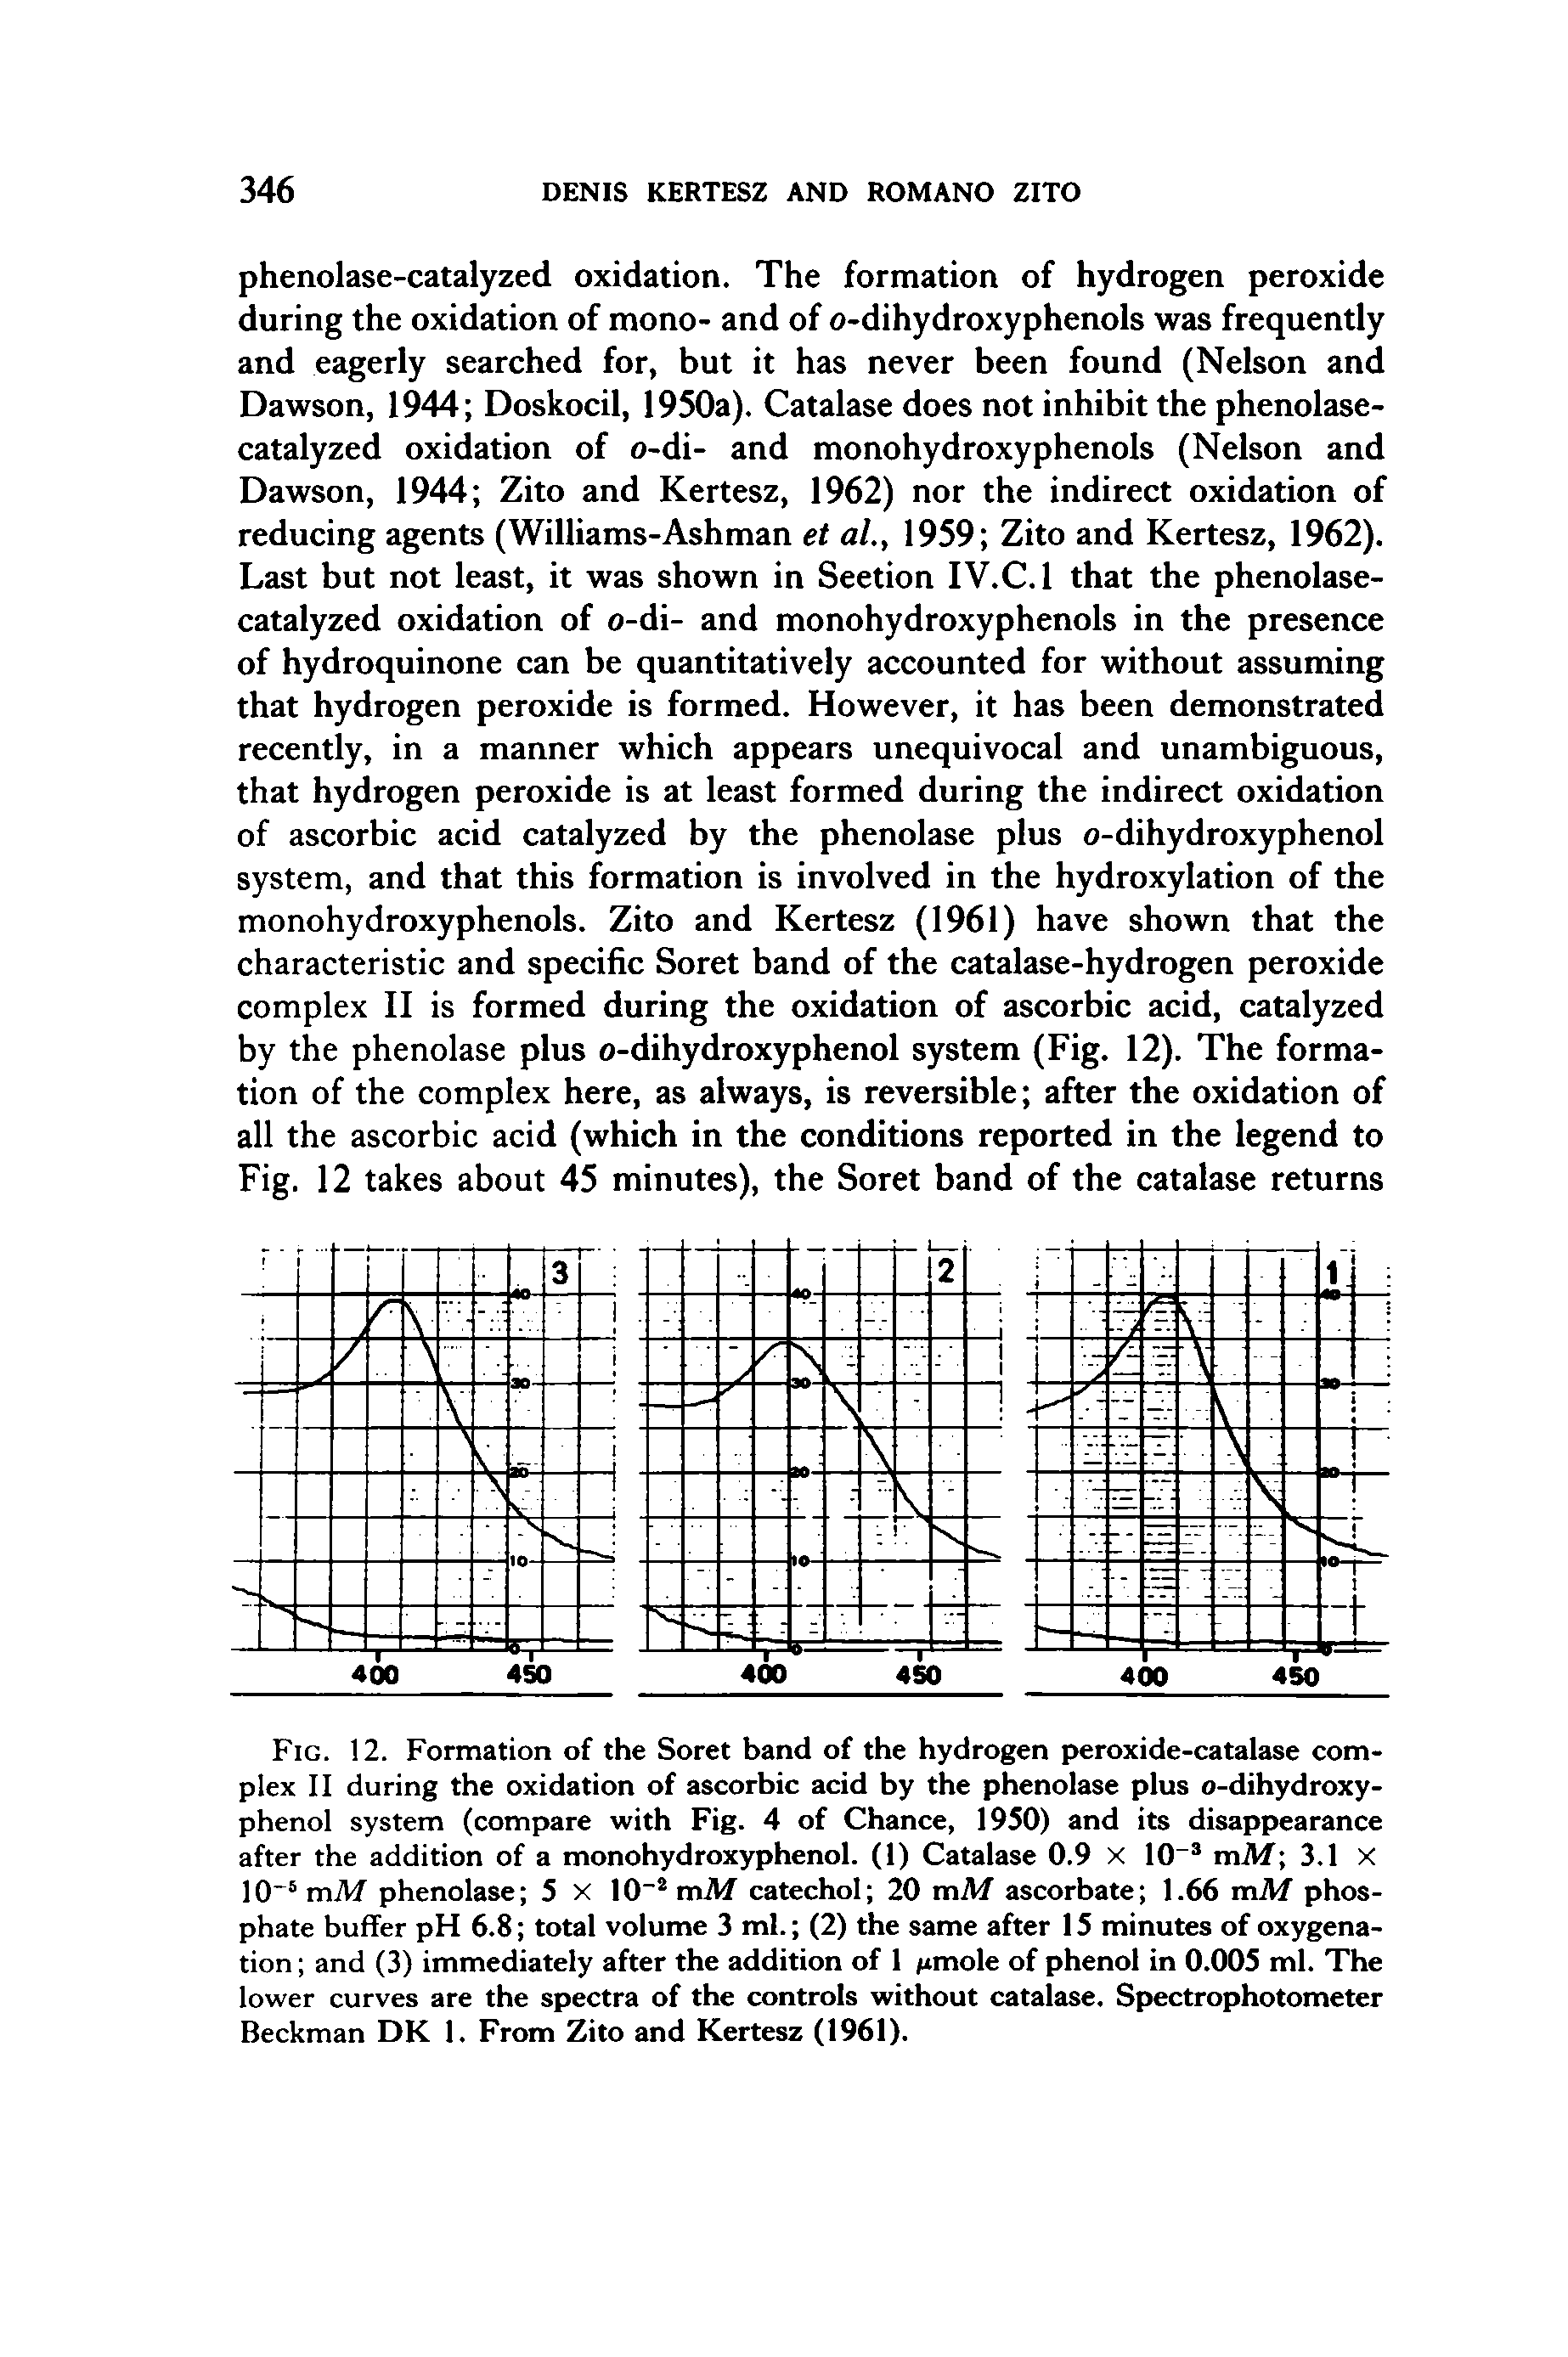 Fig. 12. Formation of the Soret band of the hydrogen peroxide-catalase complex II during the oxidation of ascorbic acid by the phenolase plus o-dihydroxyphenol system (compare with Fig. 4 of Chance, 1950) and its disappearance after the addition of a monohydroxyphenol. (1) Catalase 0.9 x 10 mAf 3.1 X 10 mM phenolase 5 x 10 mM catechol 20 vaM ascorbate 1.66 mM phosphate buffer pH 6.8 total volume 3 ml. (2) the same after 15 minutes of oxygenation and (3) immediately after the addition of 1 /tmole of phenol in 0.005 ml. The lower curves are the spectra of the controls without catalase. Spectrophotometer Beckman DK 1. From Zito and Kertesz (1961).